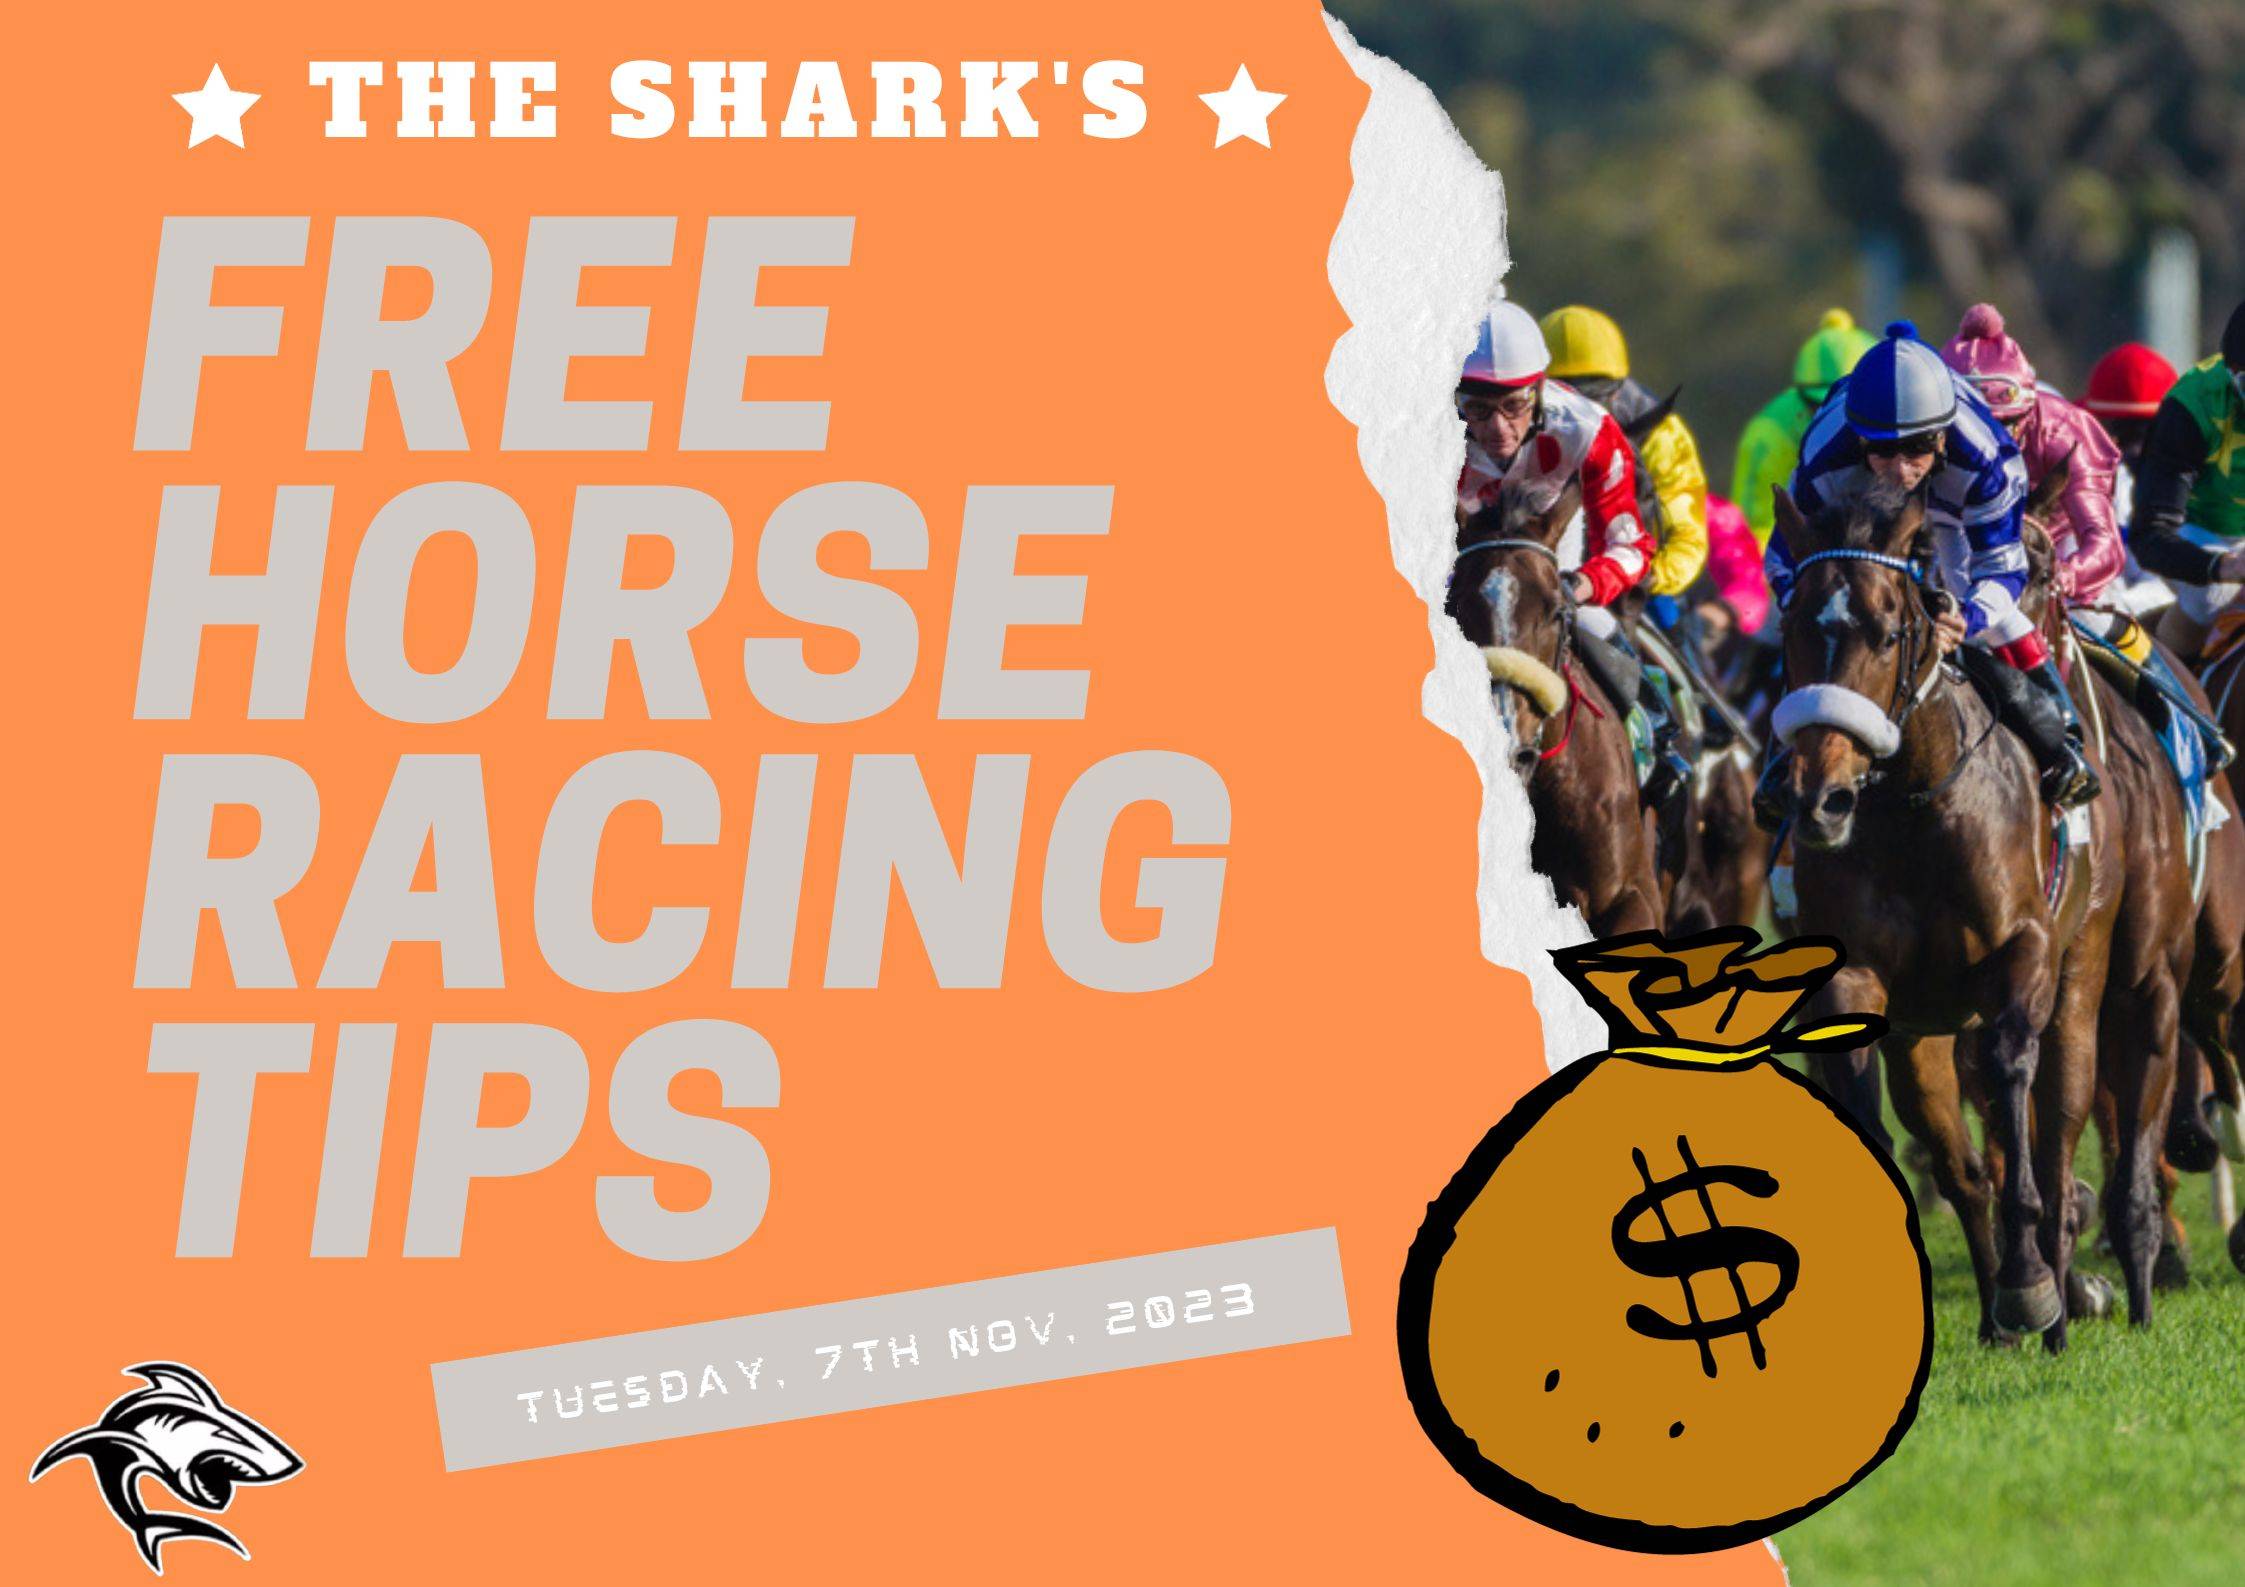 Free Horse Racing Tips - Melbourne Cup